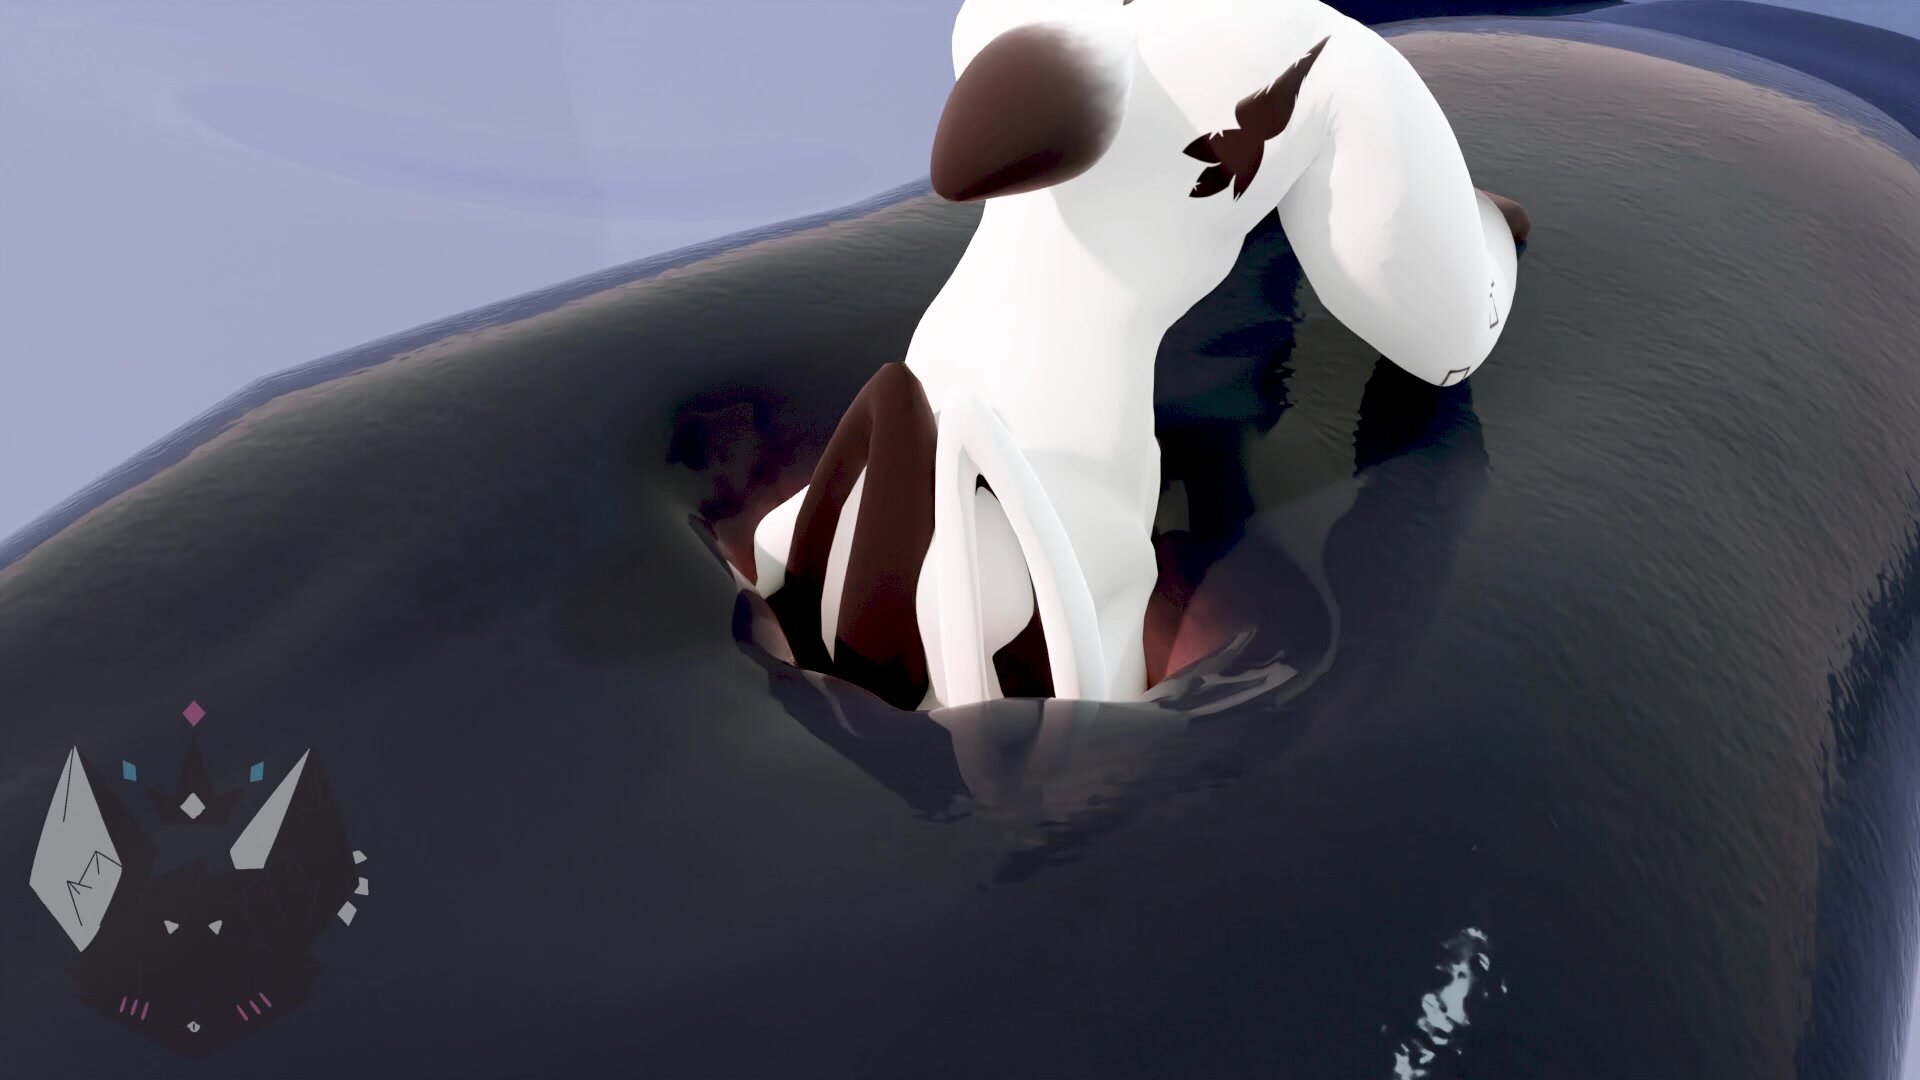 Orca anal vore